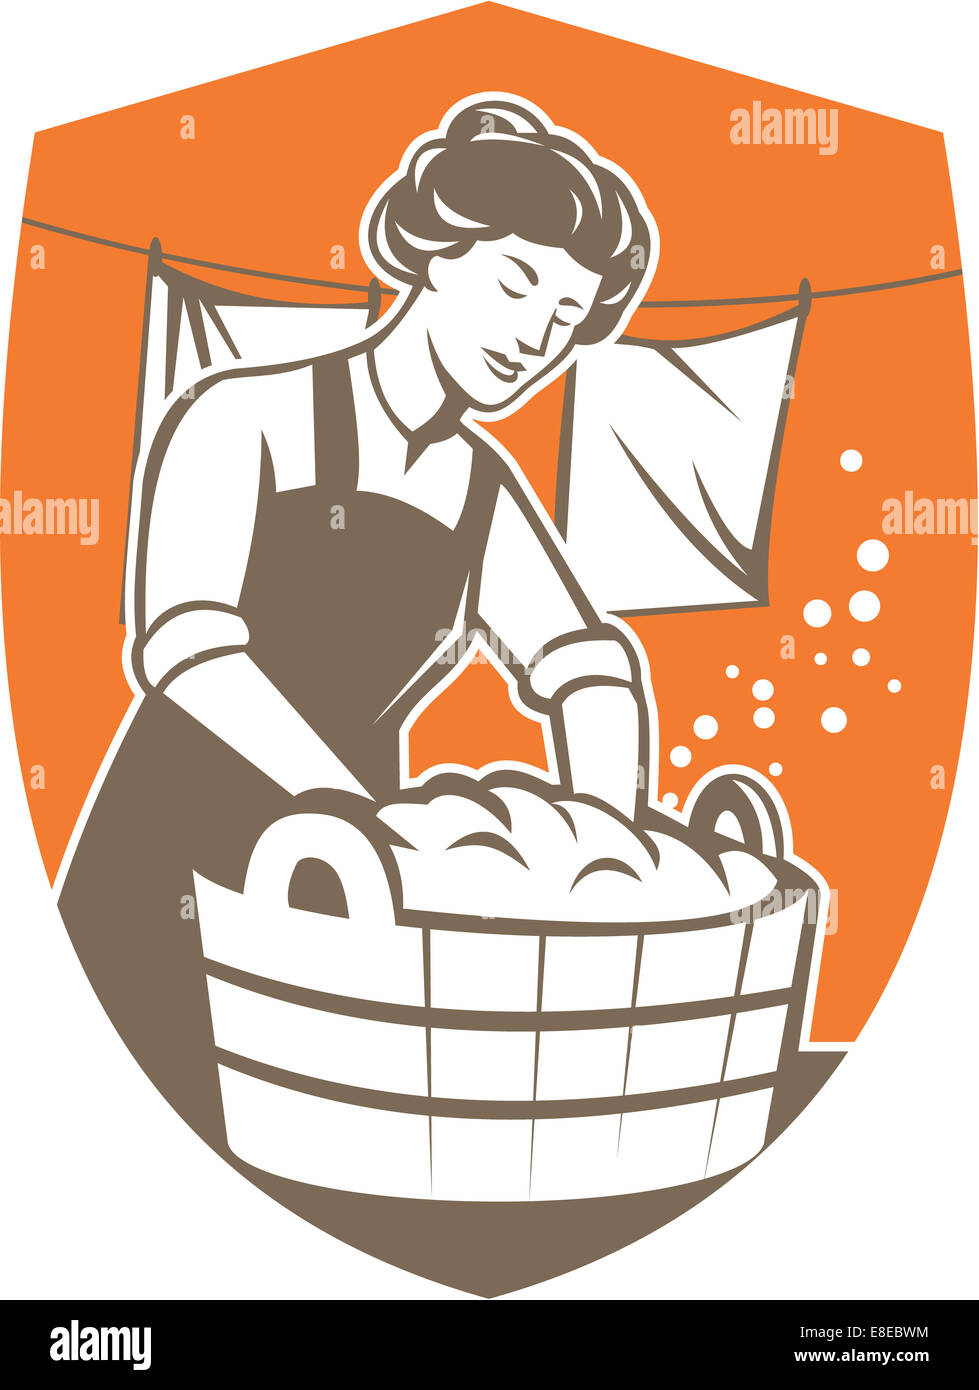 Illustration of a housewife washing laundry using wooden bucket with clothes hanging in line set inside shield crest shape done Stock Photo